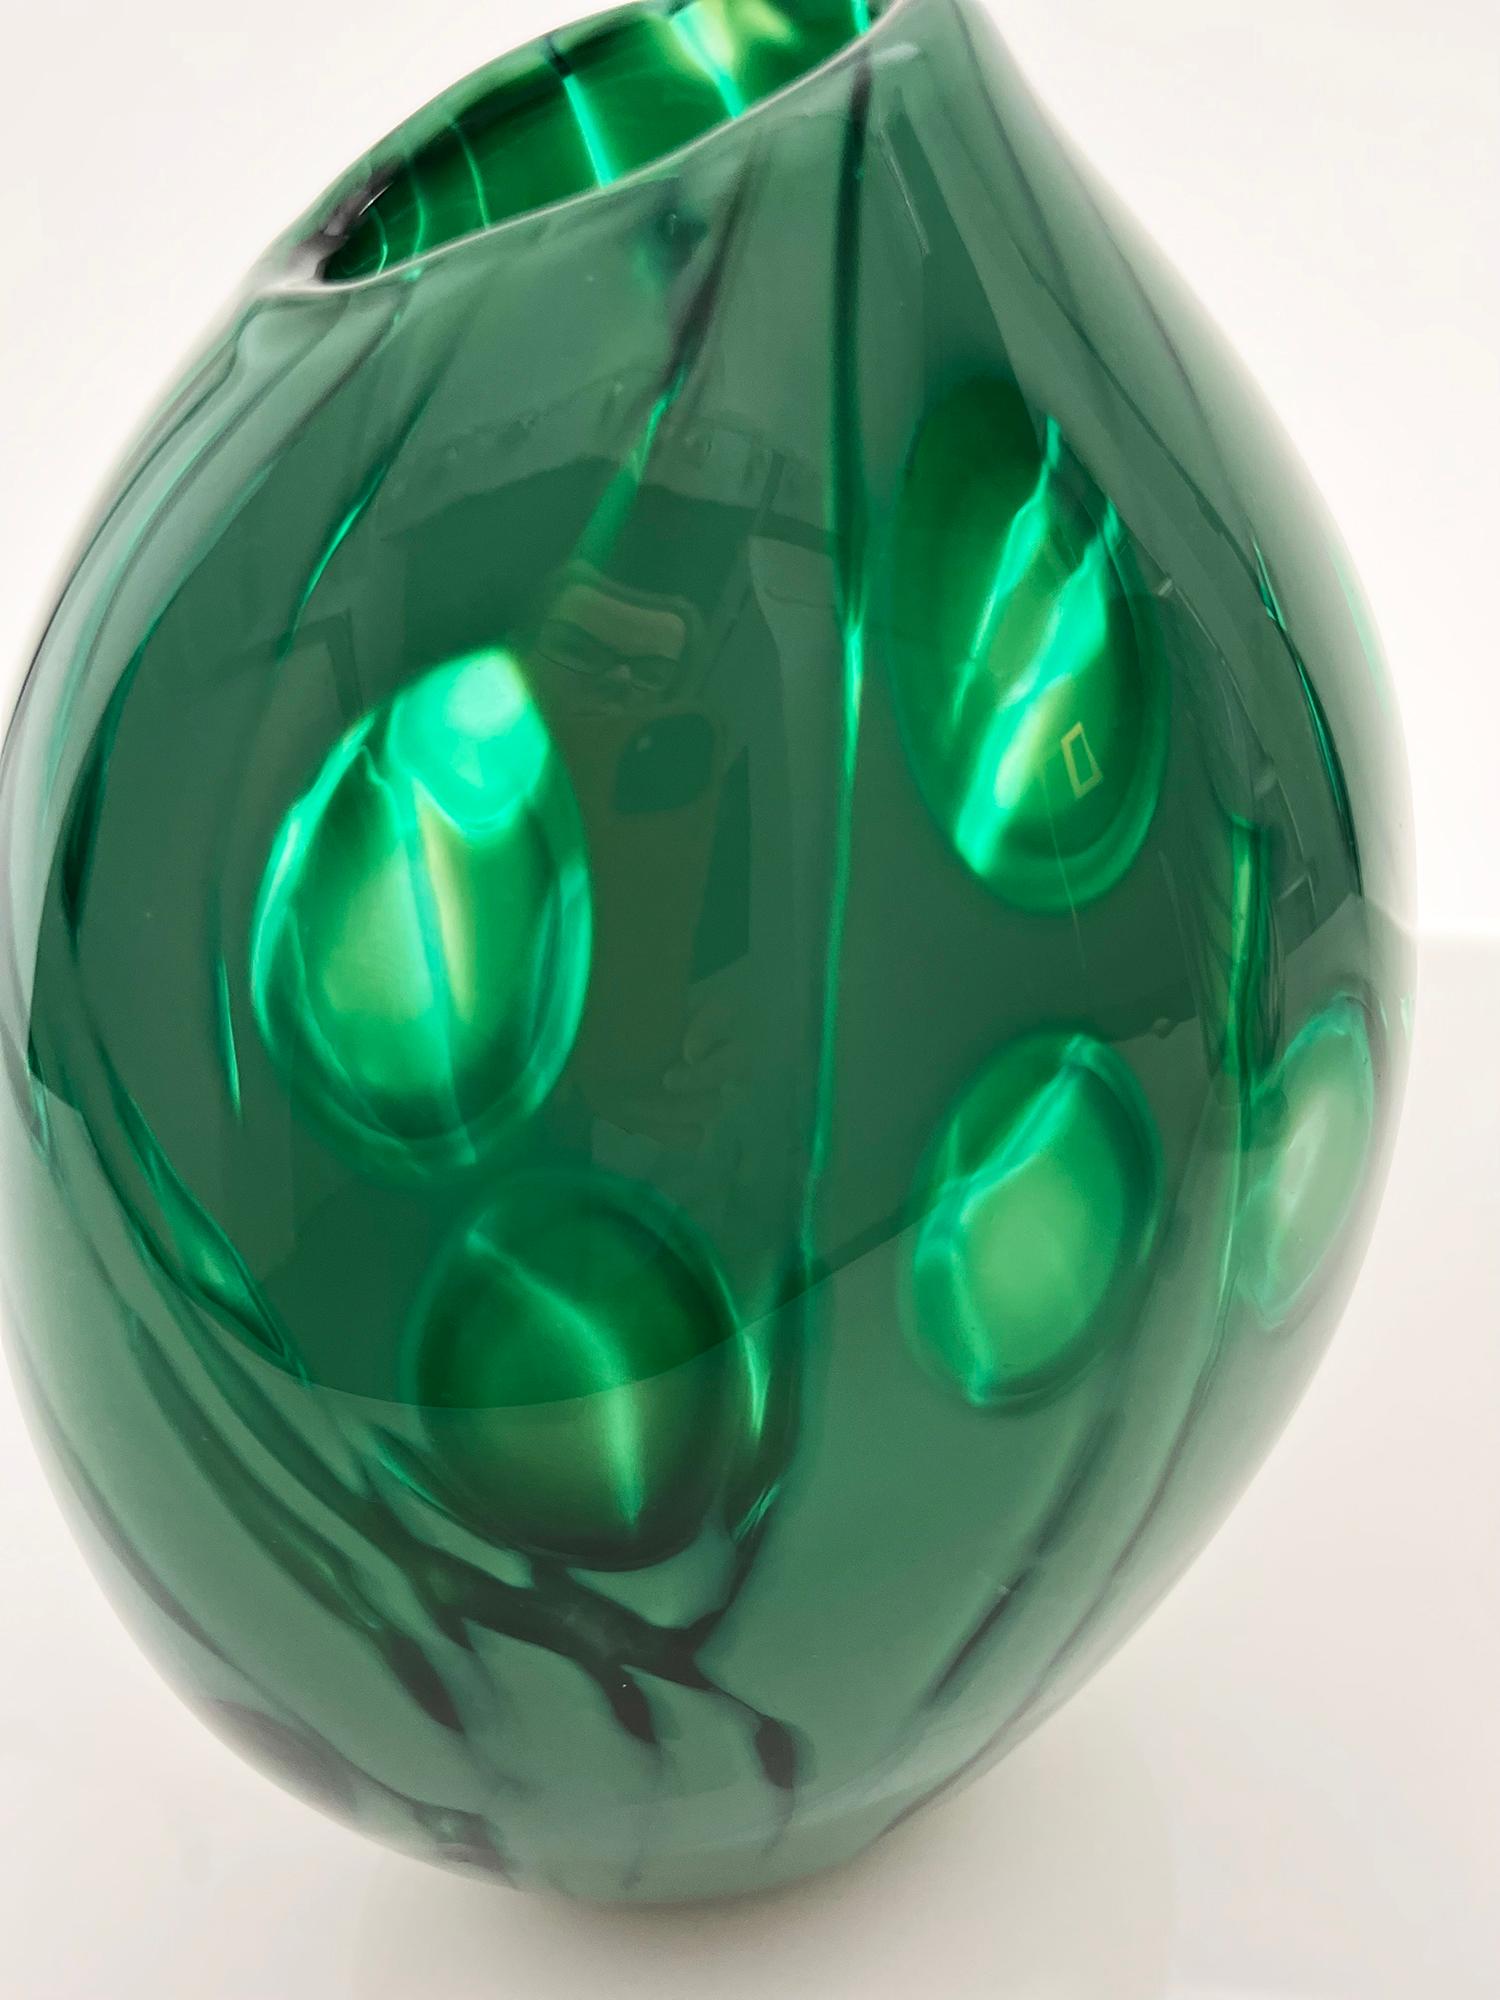 Emerald Green Glass pod is made using the Graal technique where a pattern or motif is cut through layers of glass on a smaller blank cup using diamond engraving wheels. The blank is then heated up and reblown, causing the cut marks to blend into the